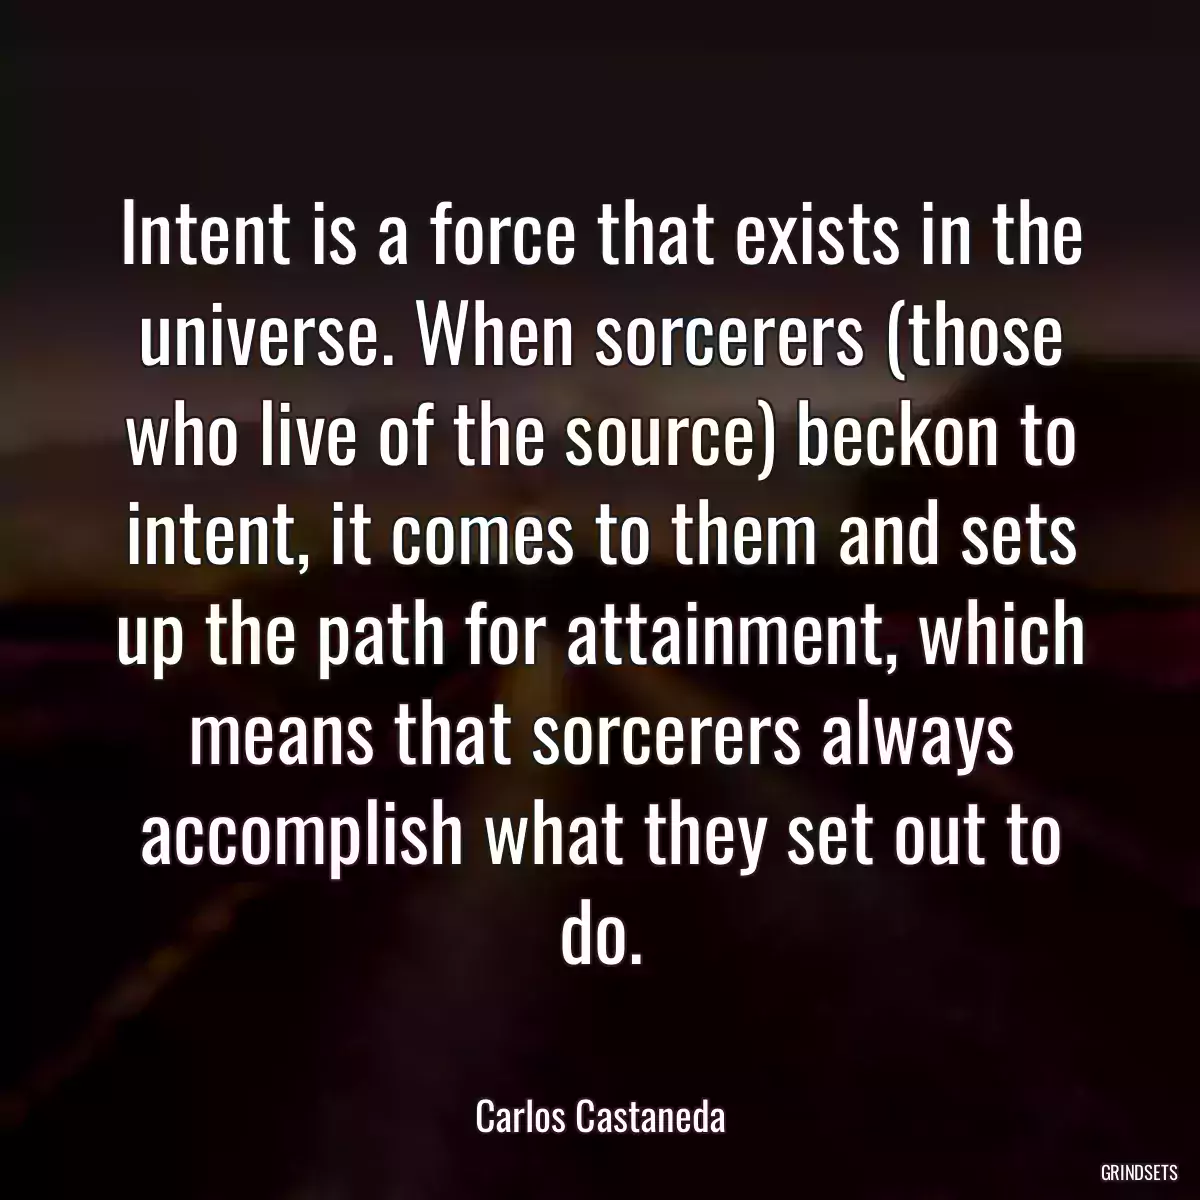 Intent is a force that exists in the universe. When sorcerers (those who live of the source) beckon to intent, it comes to them and sets up the path for attainment, which means that sorcerers always accomplish what they set out to do.